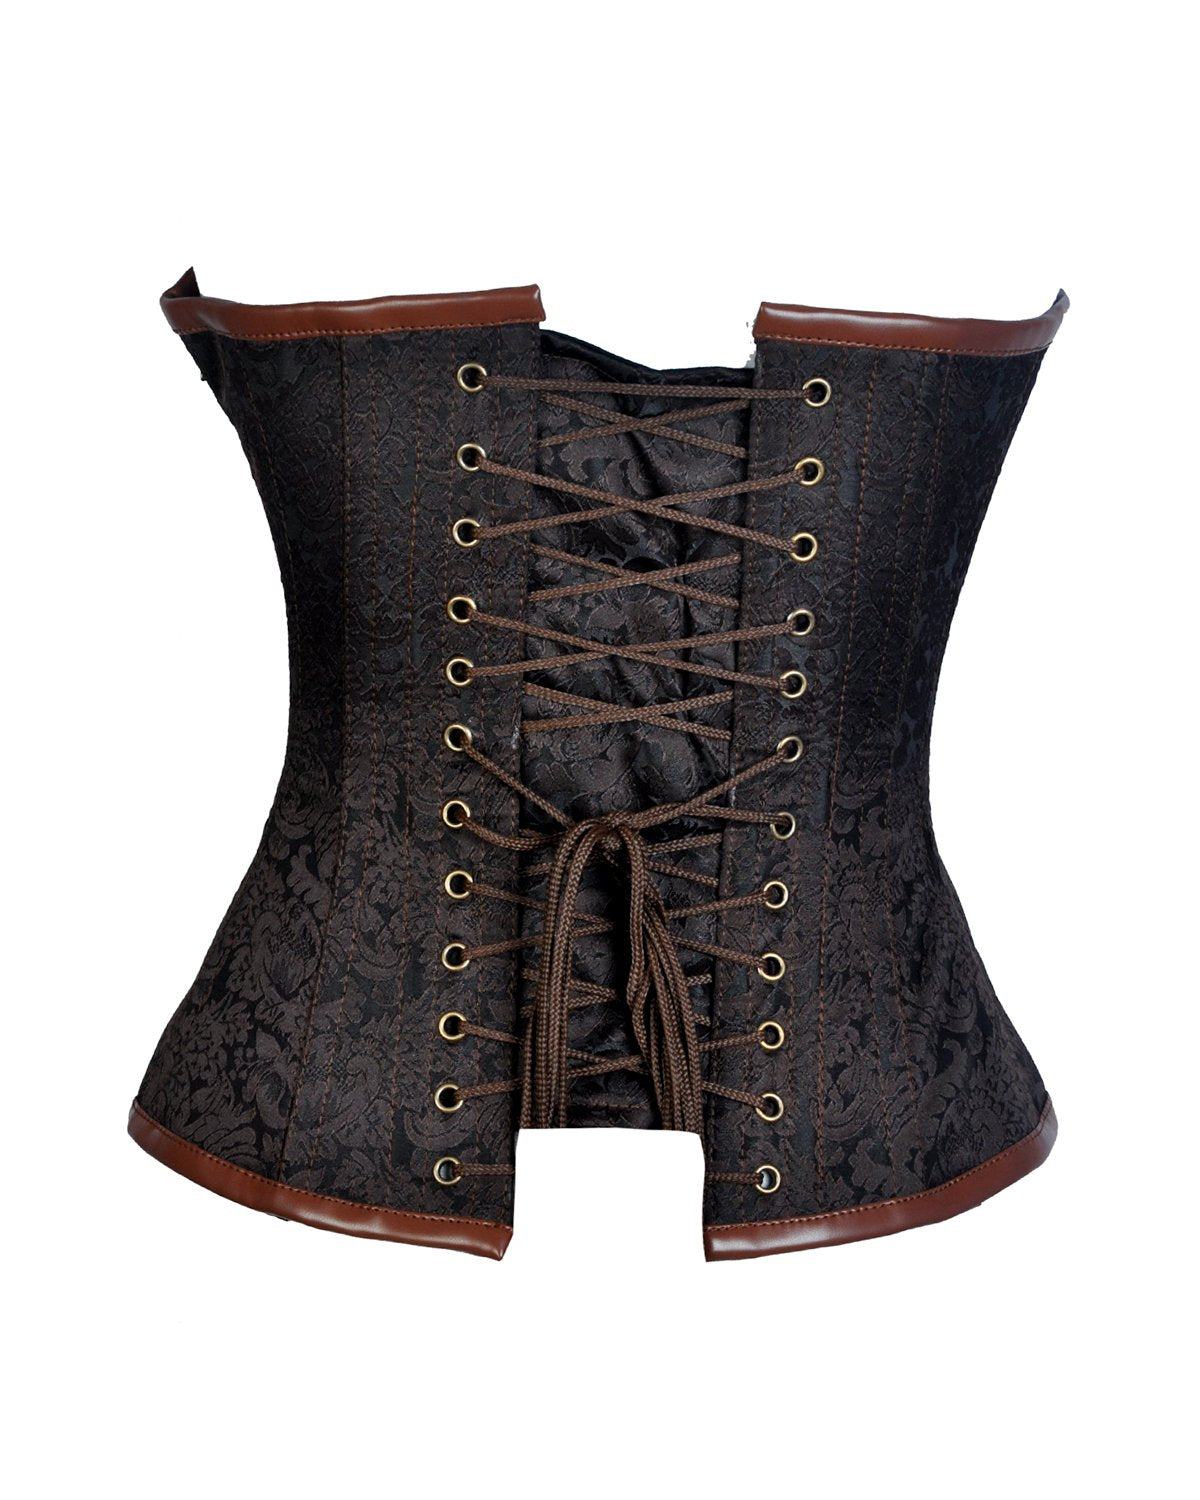 Serry Coffee Brocade & Faux Leather Steampunk Corset